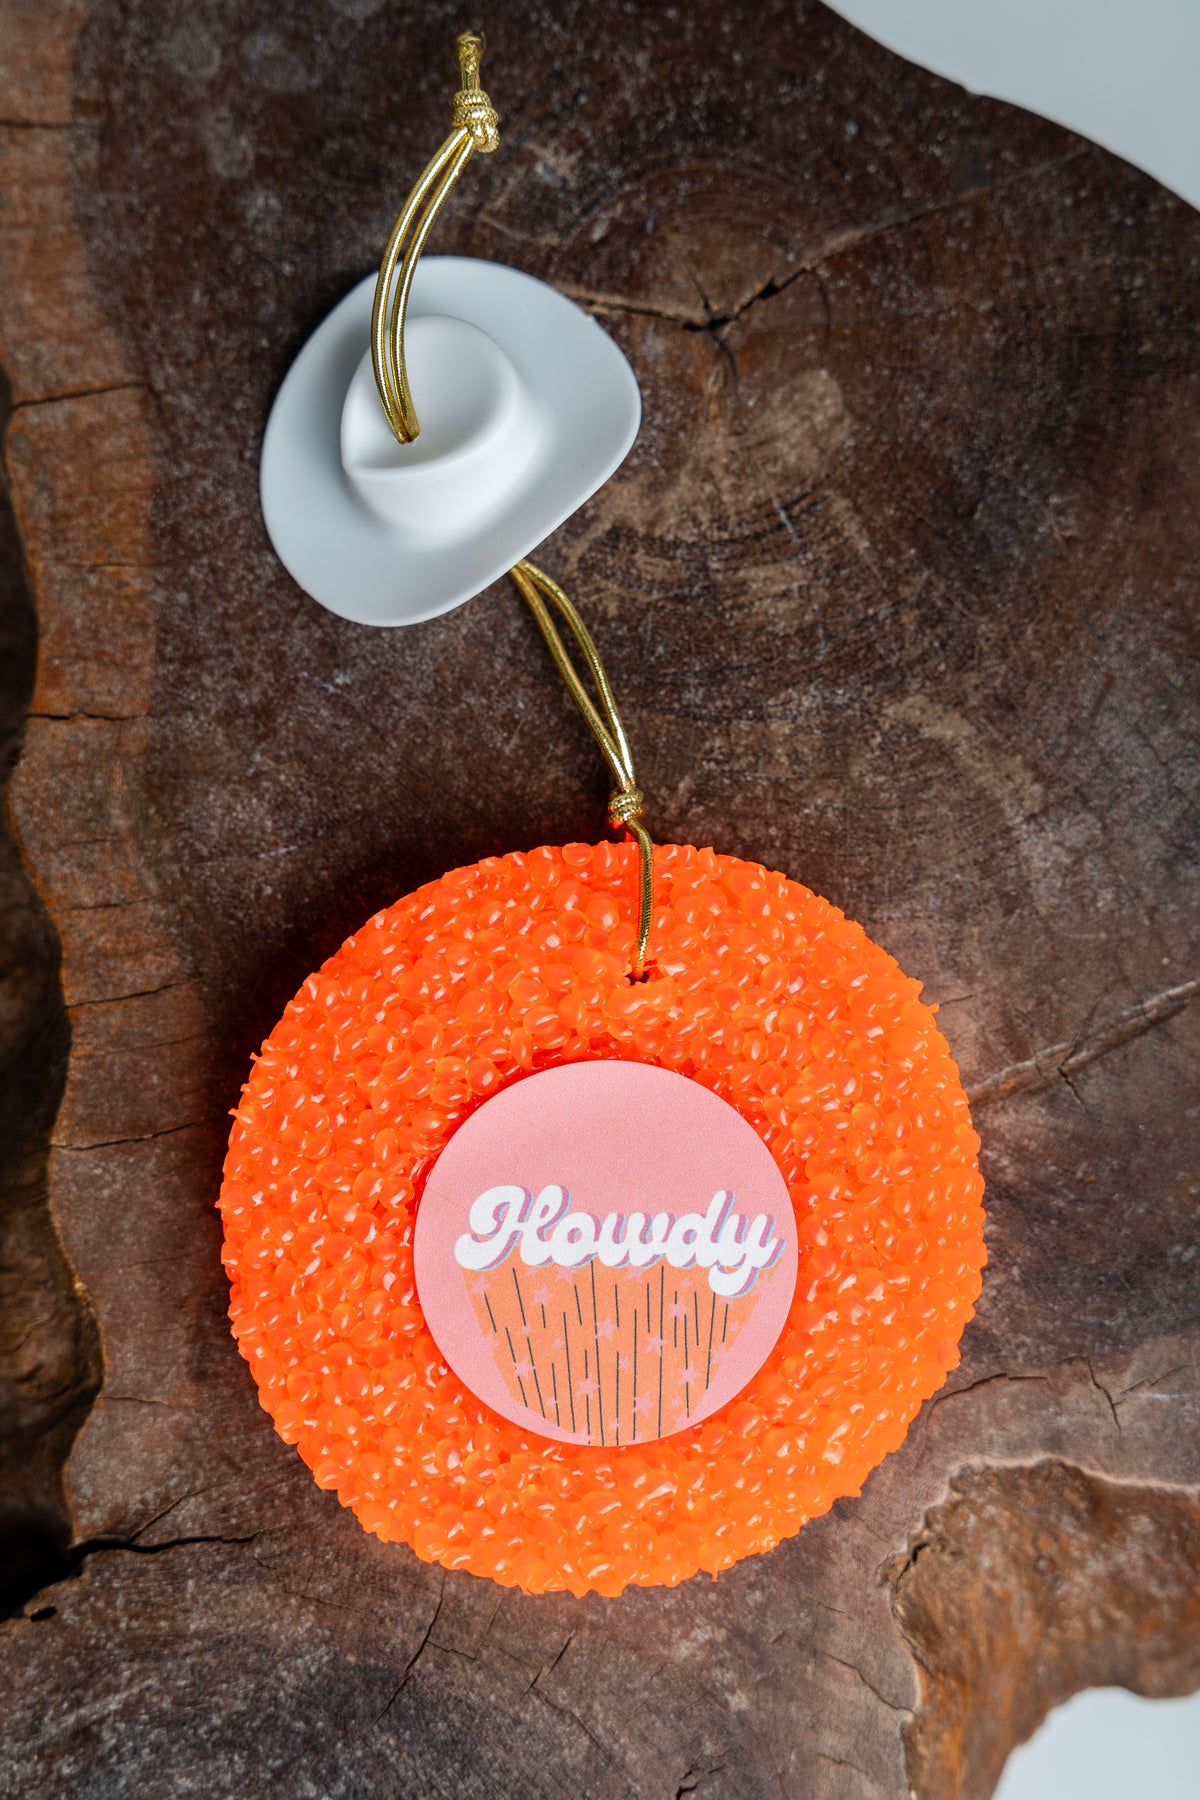 Howdy cowboy hat orange freshie urban cowboy - Trendy Candles and Scents at Lush Fashion Lounge Boutique in Oklahoma City